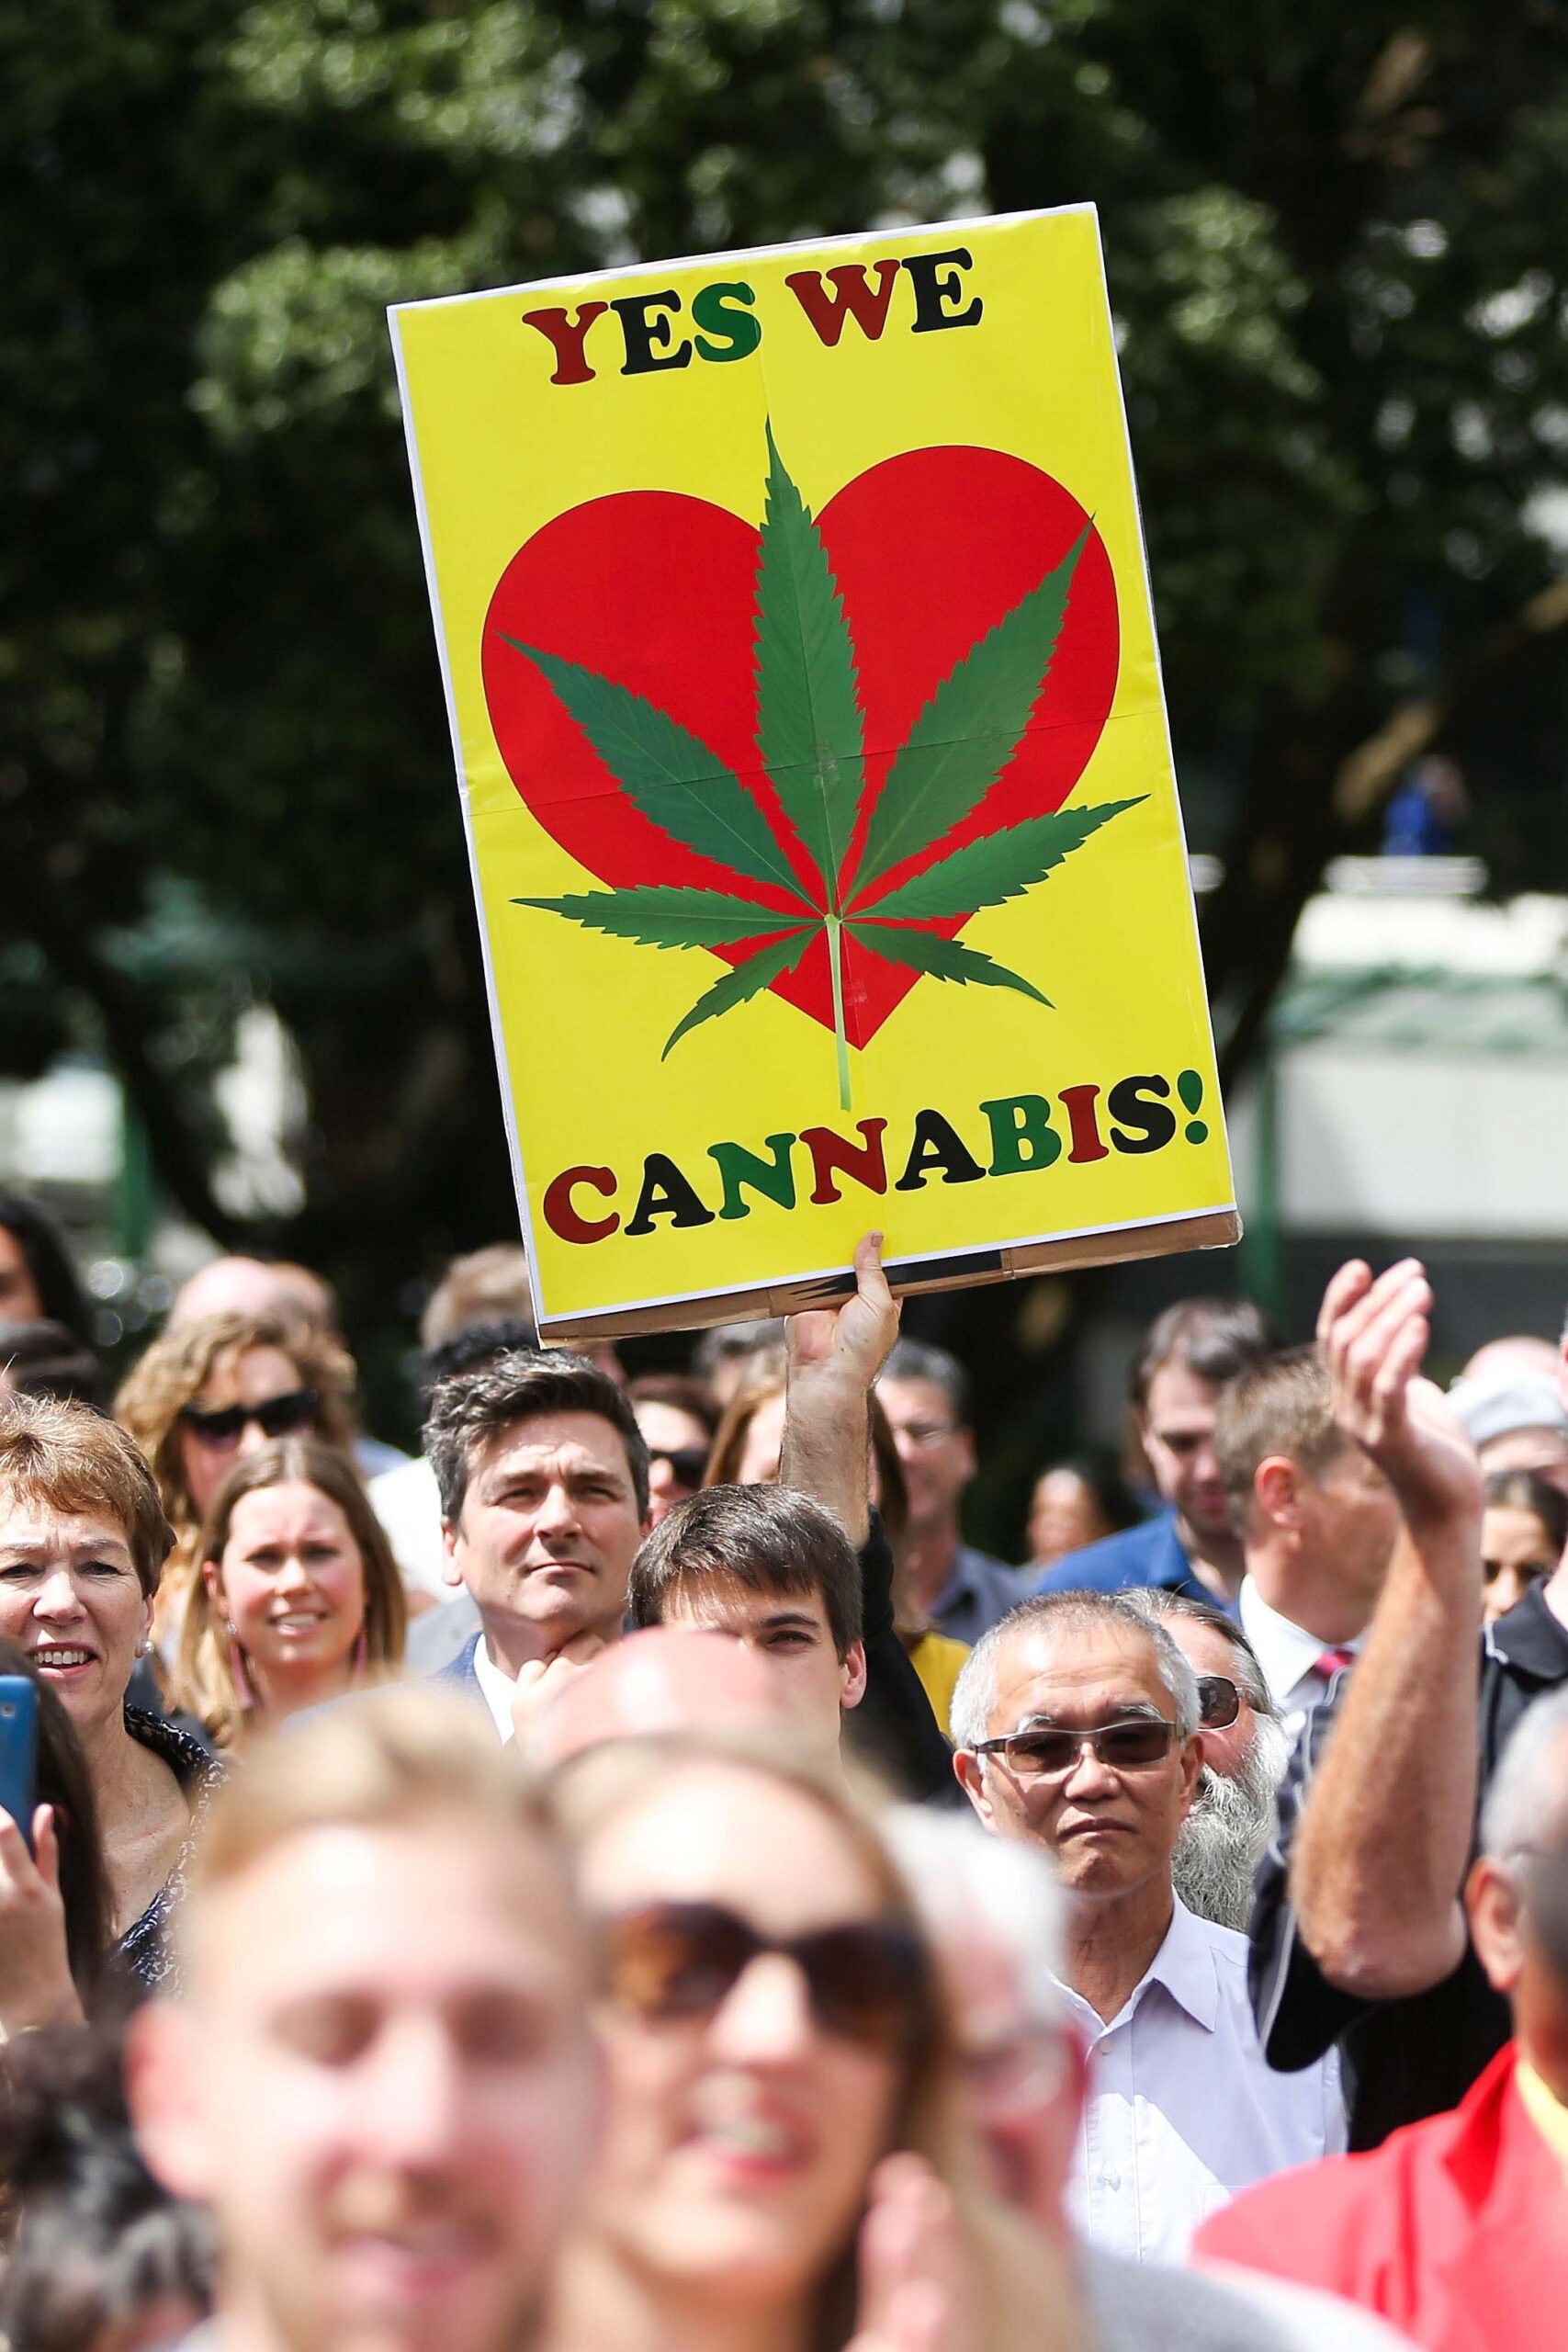 Protesters at a rally holding a pro-cannabis sign.